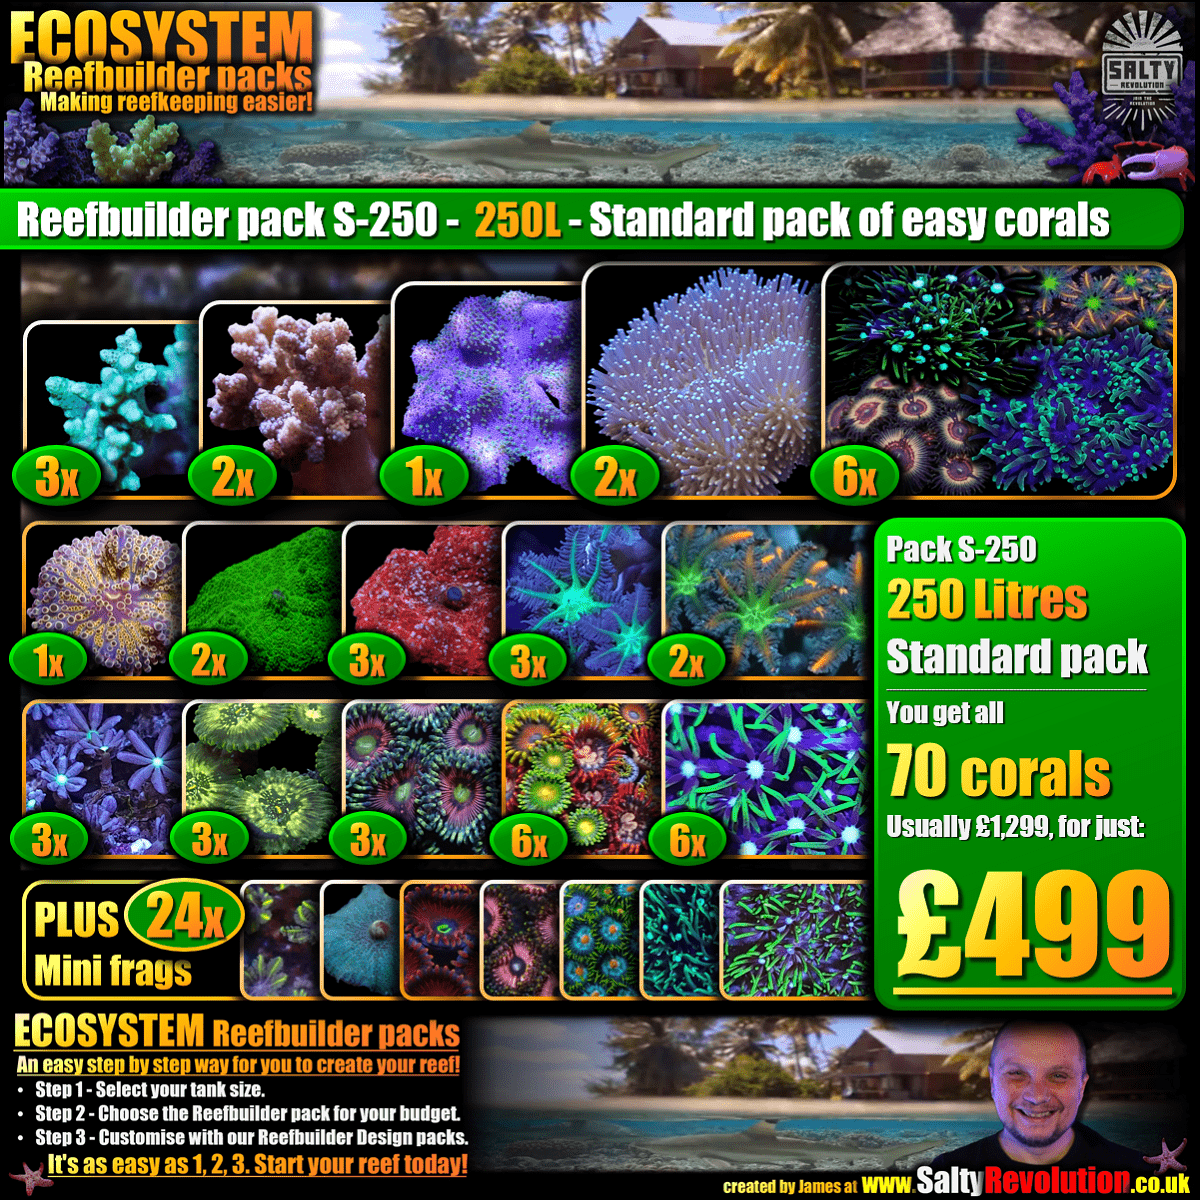 SS - New! - ECOSYSTEM Reefbuilder pack S-250 - 250L Standard pack of easy corals